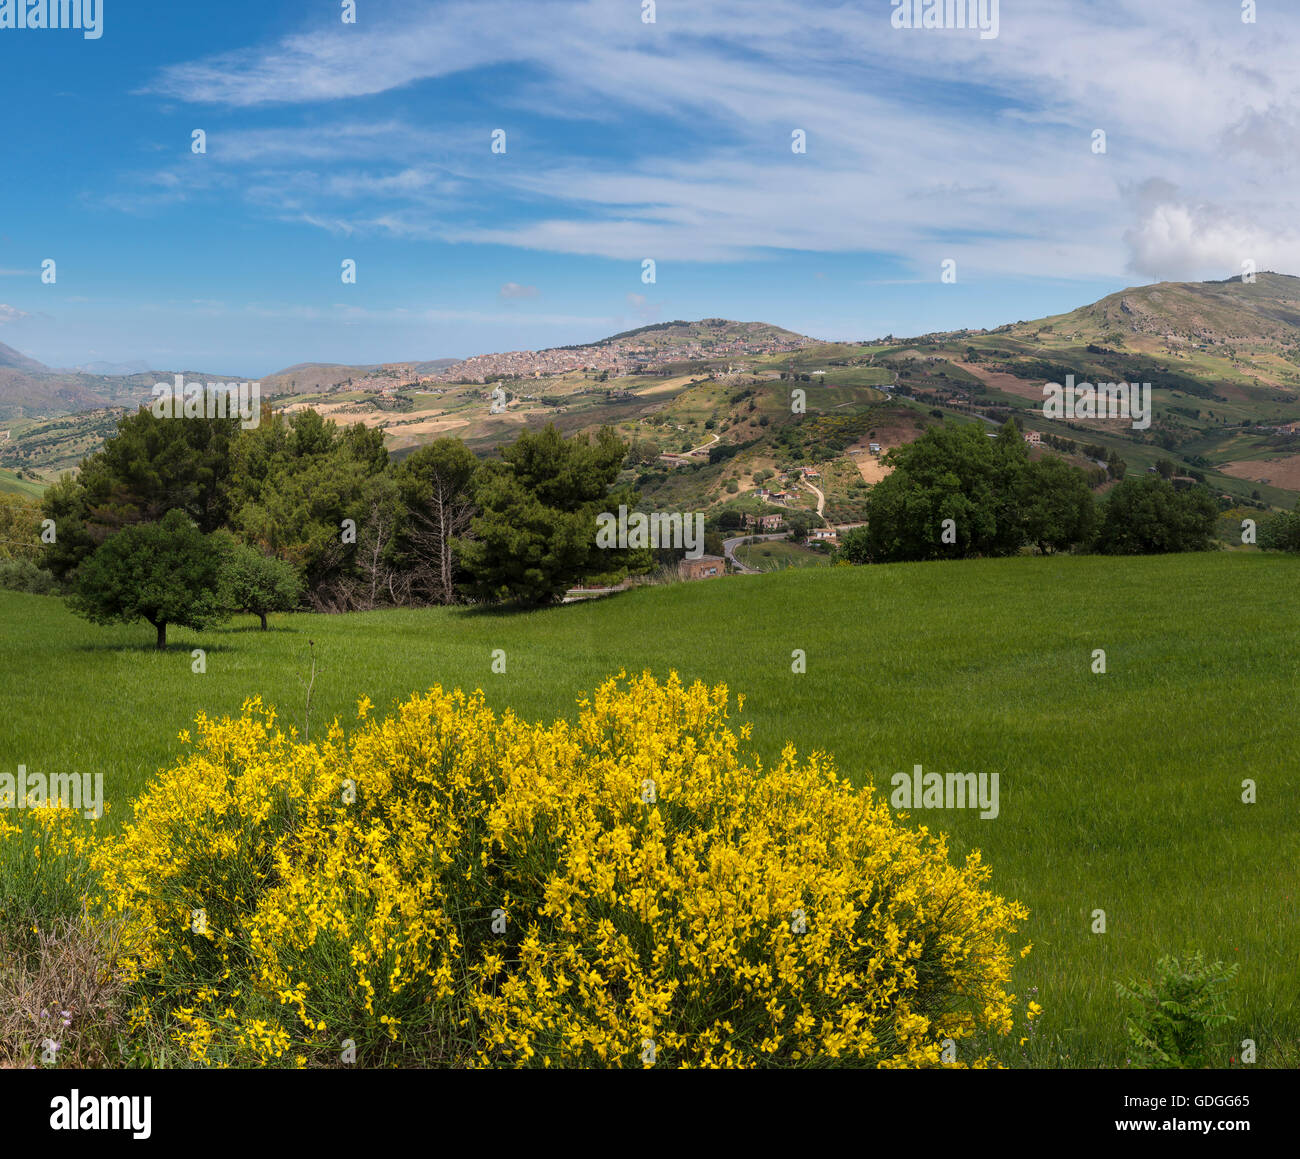 Hilly landscape with broom in bloom Stock Photo